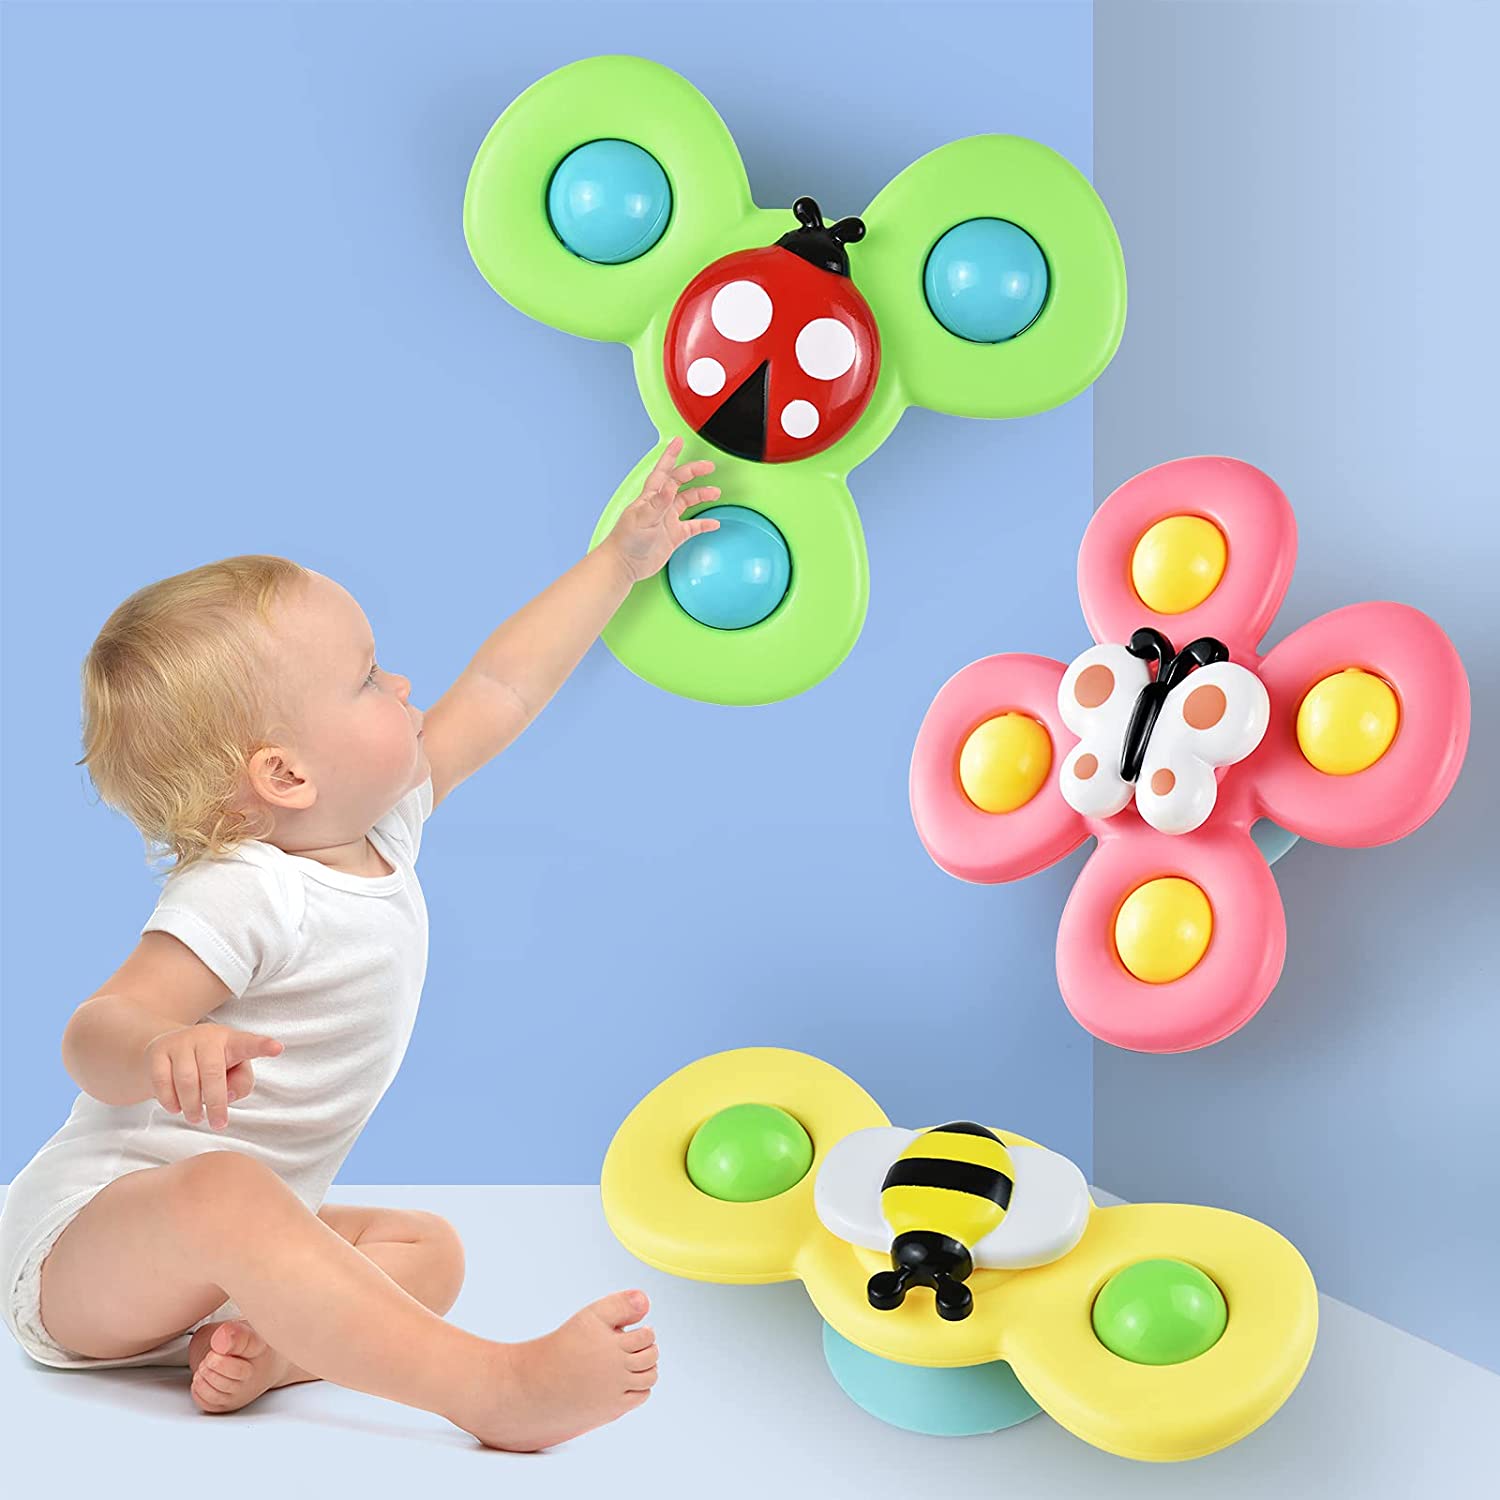 Dining Table or High Chair SEPEORUL Suction Cup Spinning Top Toy 3PCs Baby Bath Toys 2021 New Baby Toys Interesting Sucker Gameplay Early Learner Toys for Bath Tub 